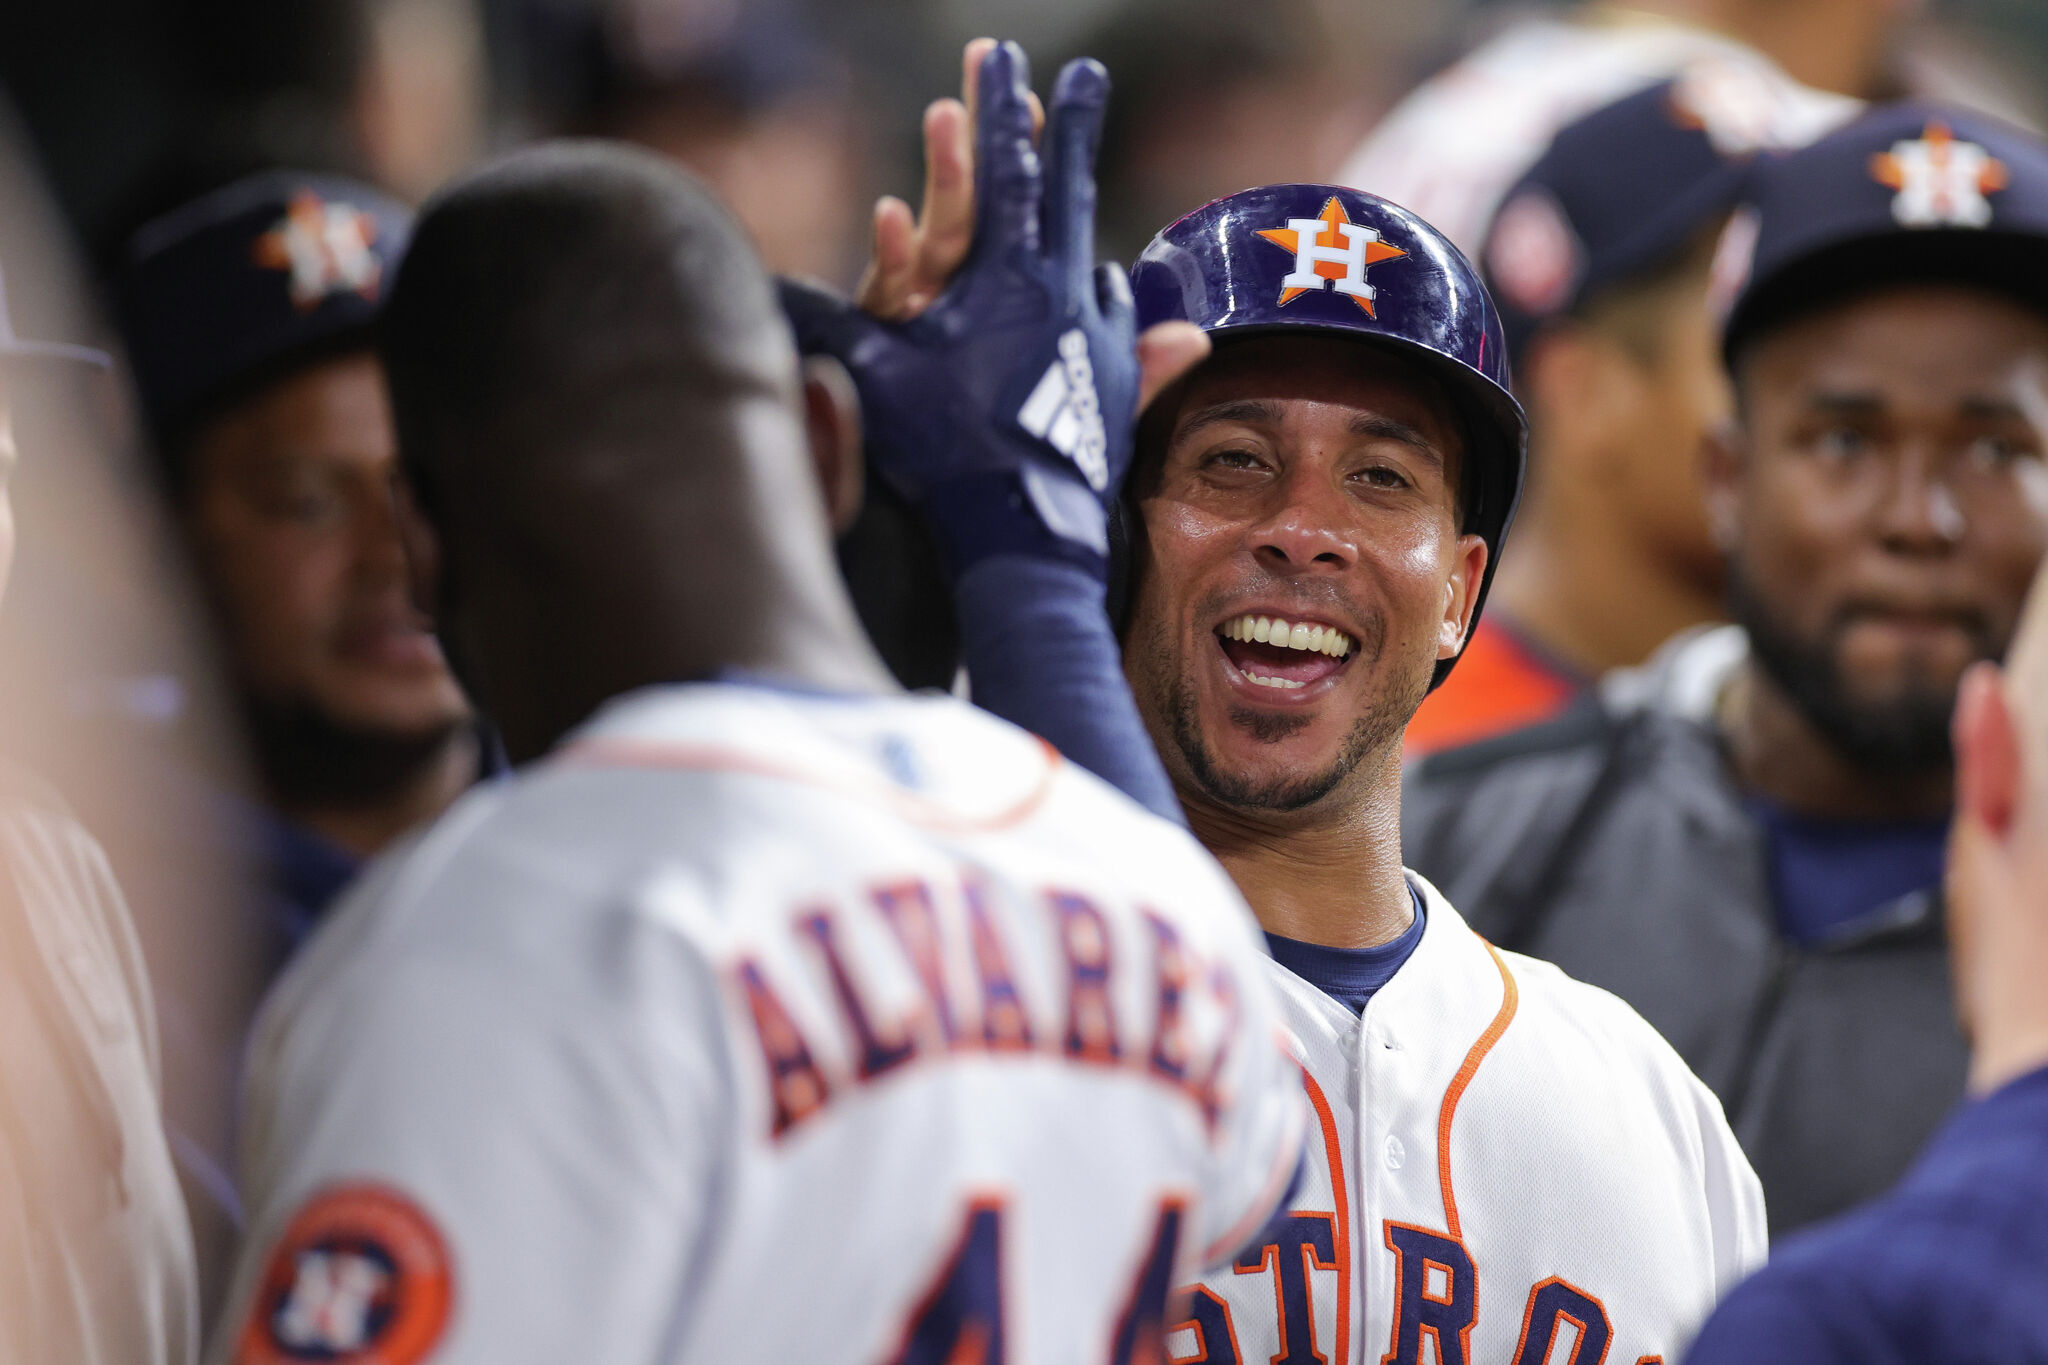 Michael Brantley returns to Astros' lineup, ending year-plus absence